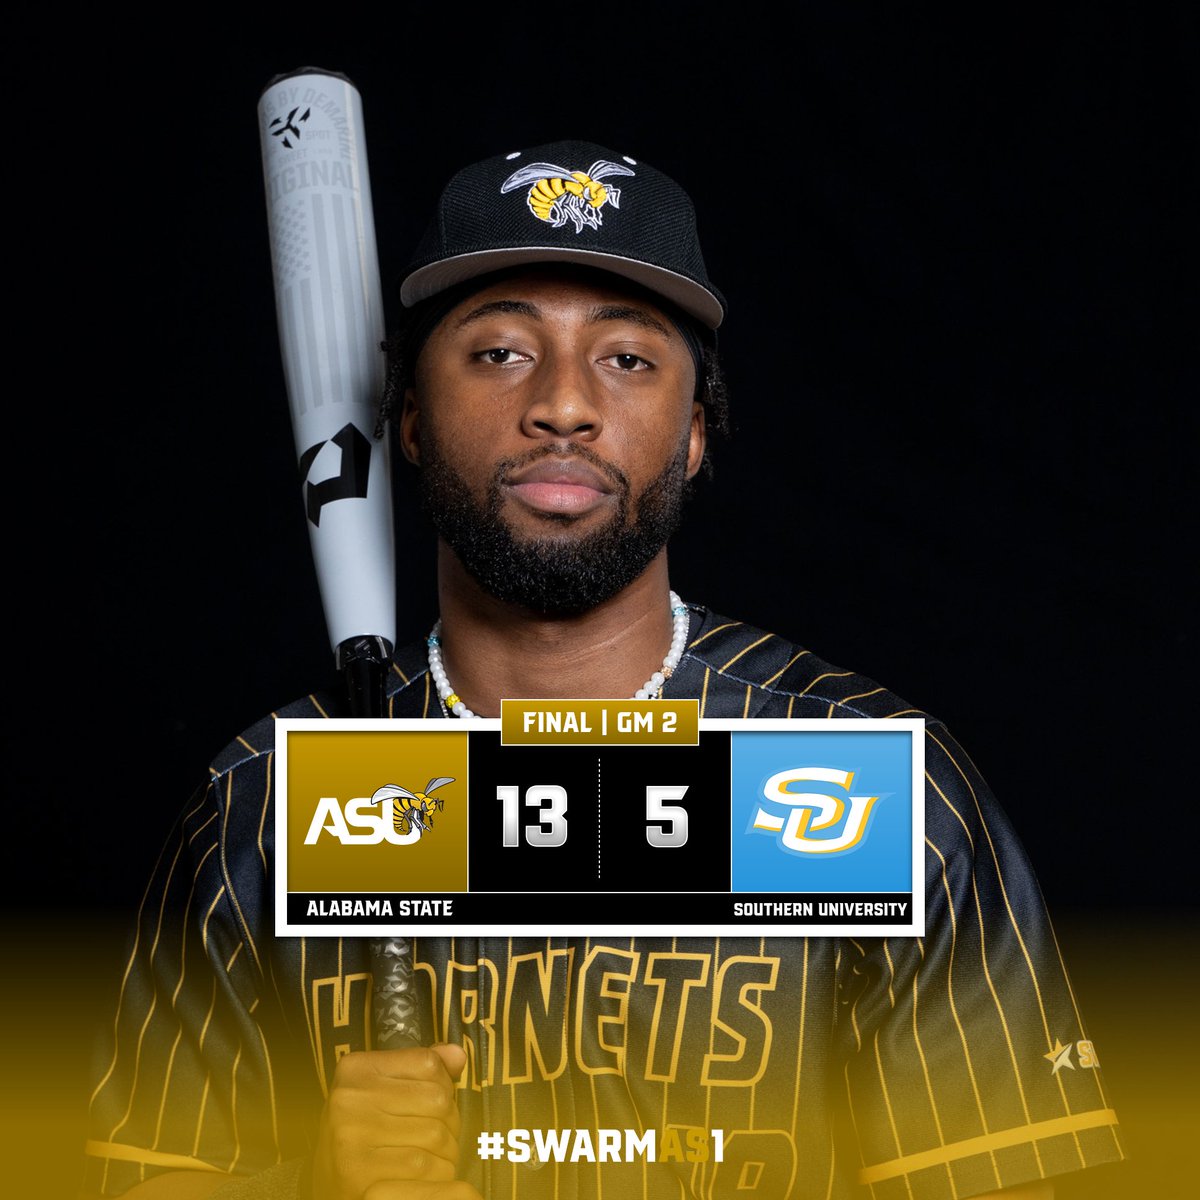 Nothing like a DH sweep! First pitch for Sunday's series finale is 2 p.m. #SWARMAS1